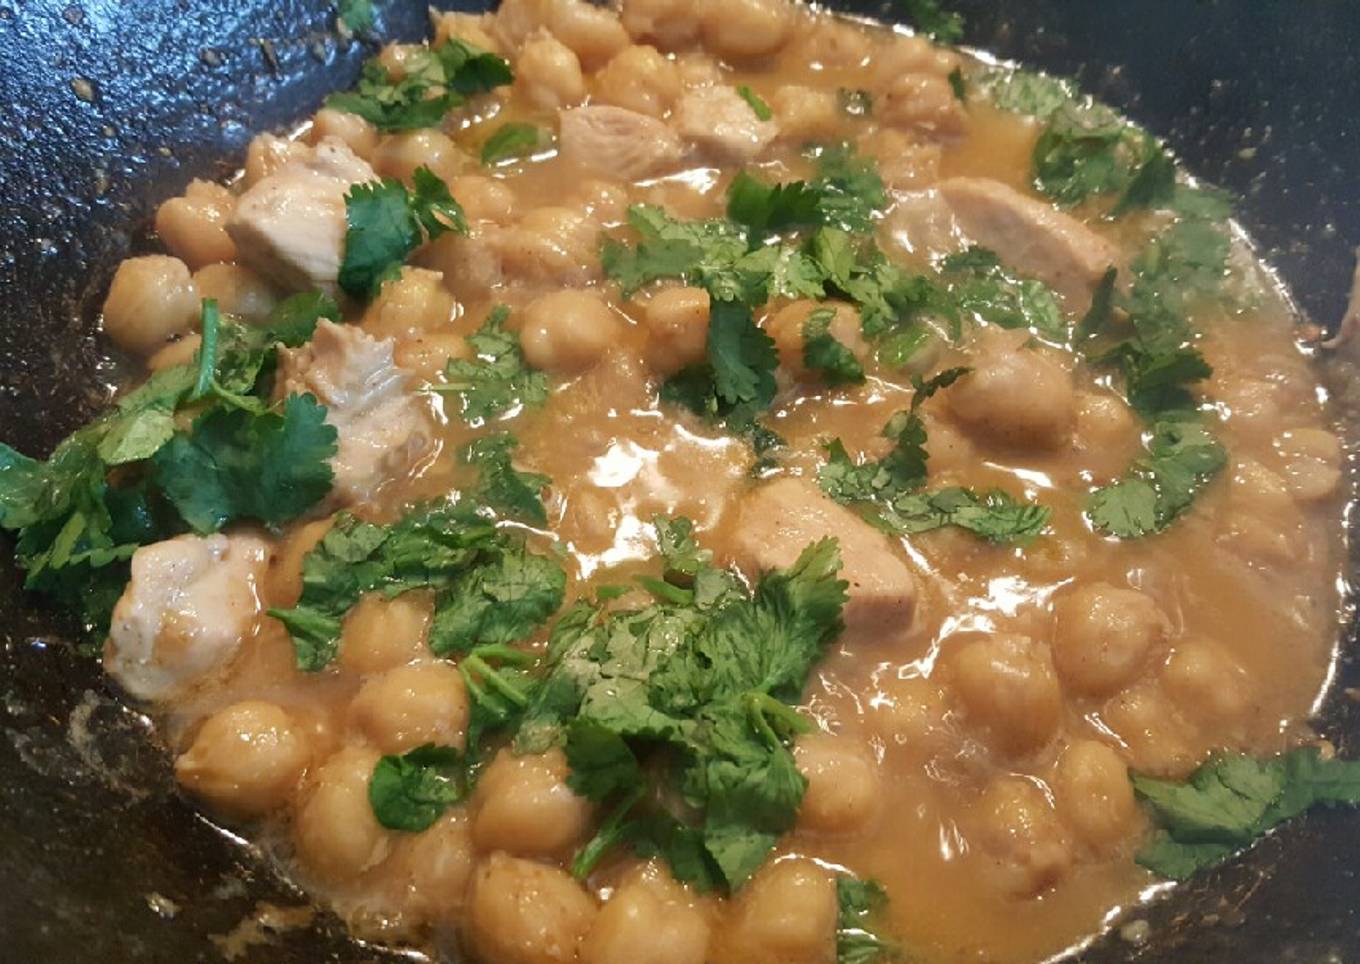 Chicken chickpea curry (Murgh cholay salan)☺🍜